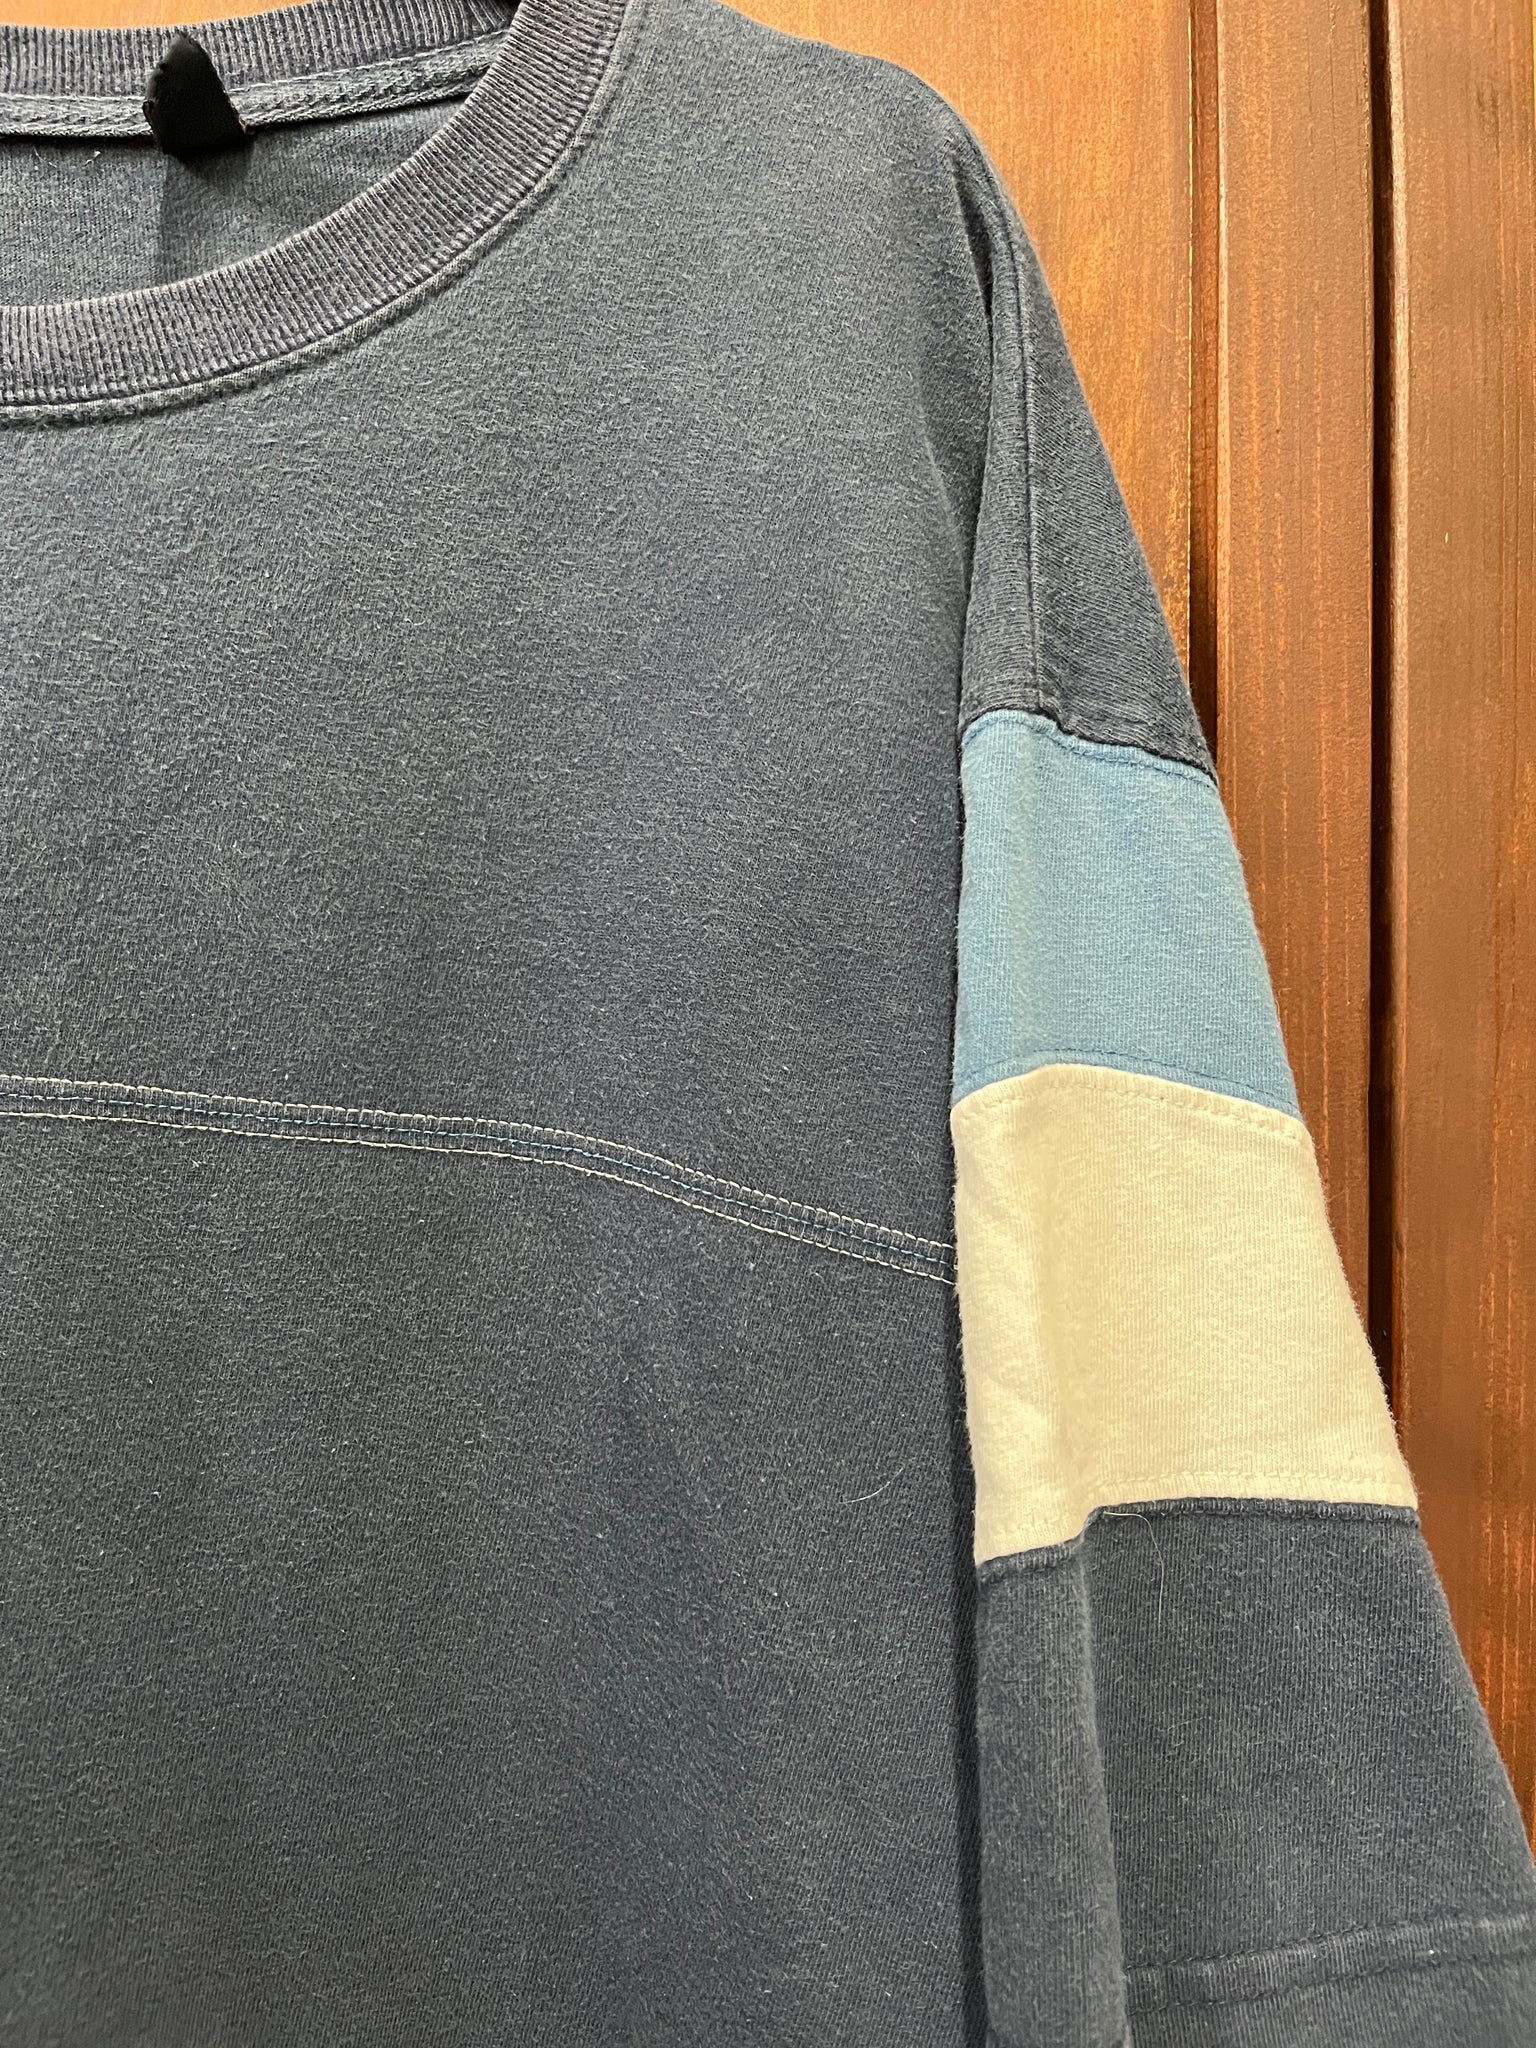 1990s T SHIRT-navy blue w/ color banded sleeves